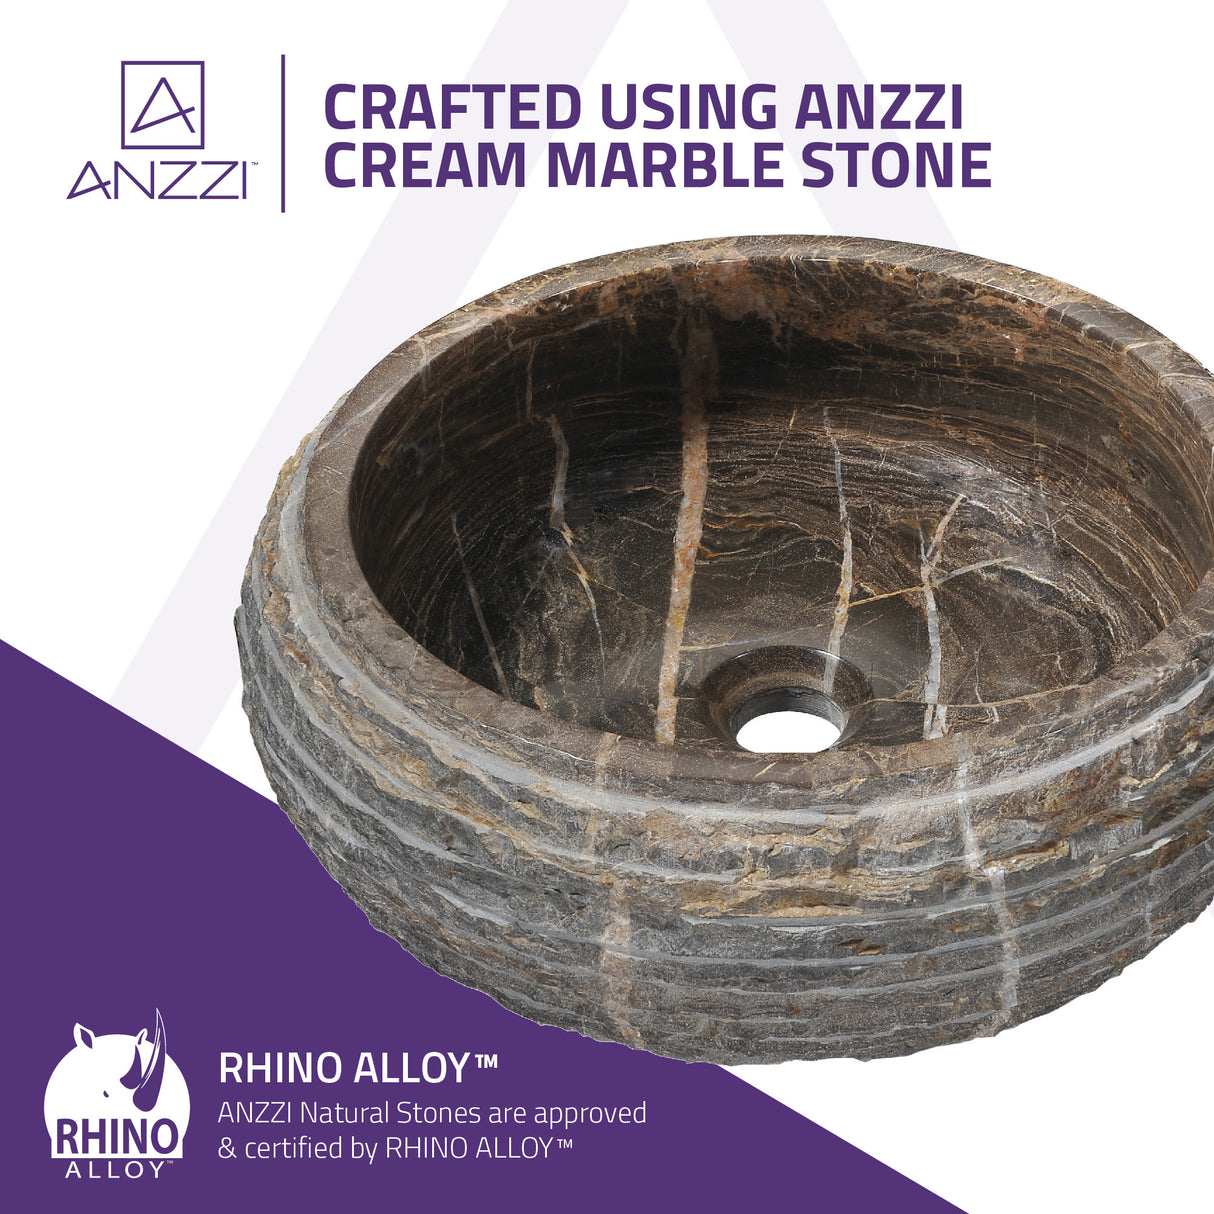 ANZZI LS-AZ8311-2H Mirage Ash Natural Stone Vessel Sink in Coffee Marble